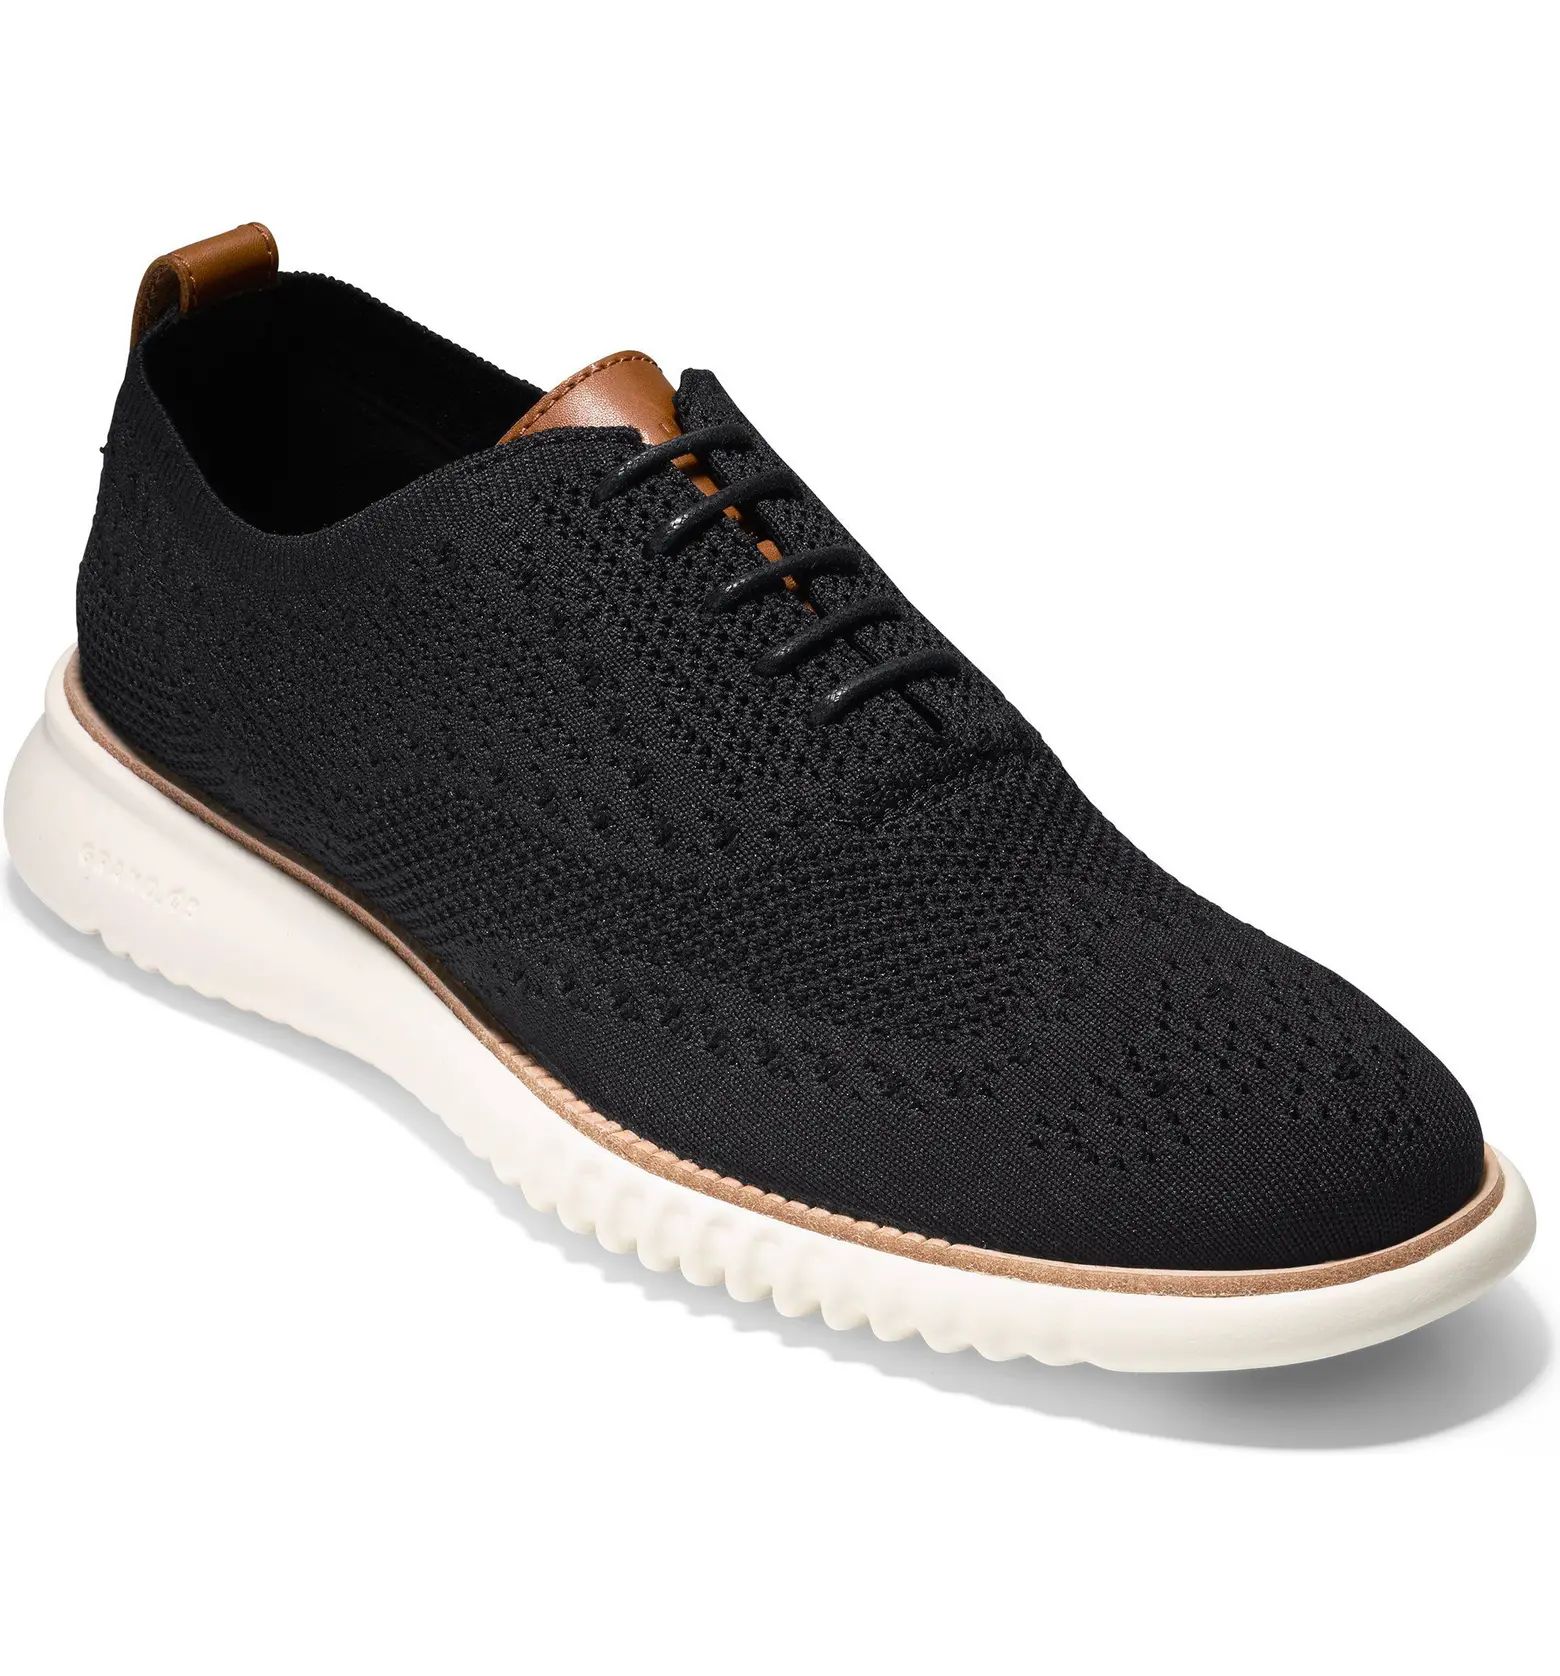 Rating 4.5out of5stars(97)972.ZeroGrand Stitchlite WingtipCOLE HAAN | Nordstrom Rack